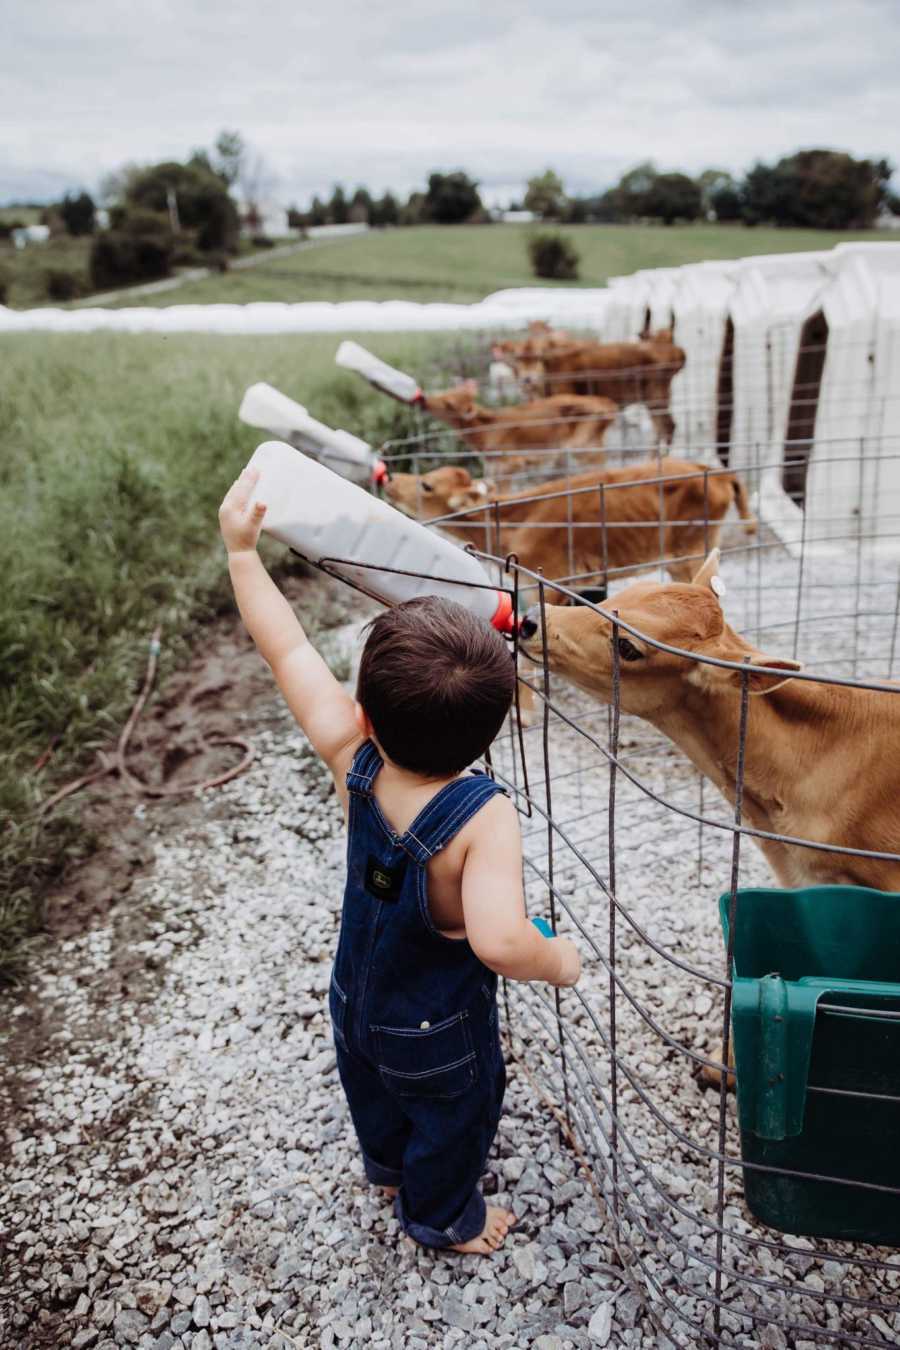 Line of calfs drink out of milk bottles and little boy helps feed one of them